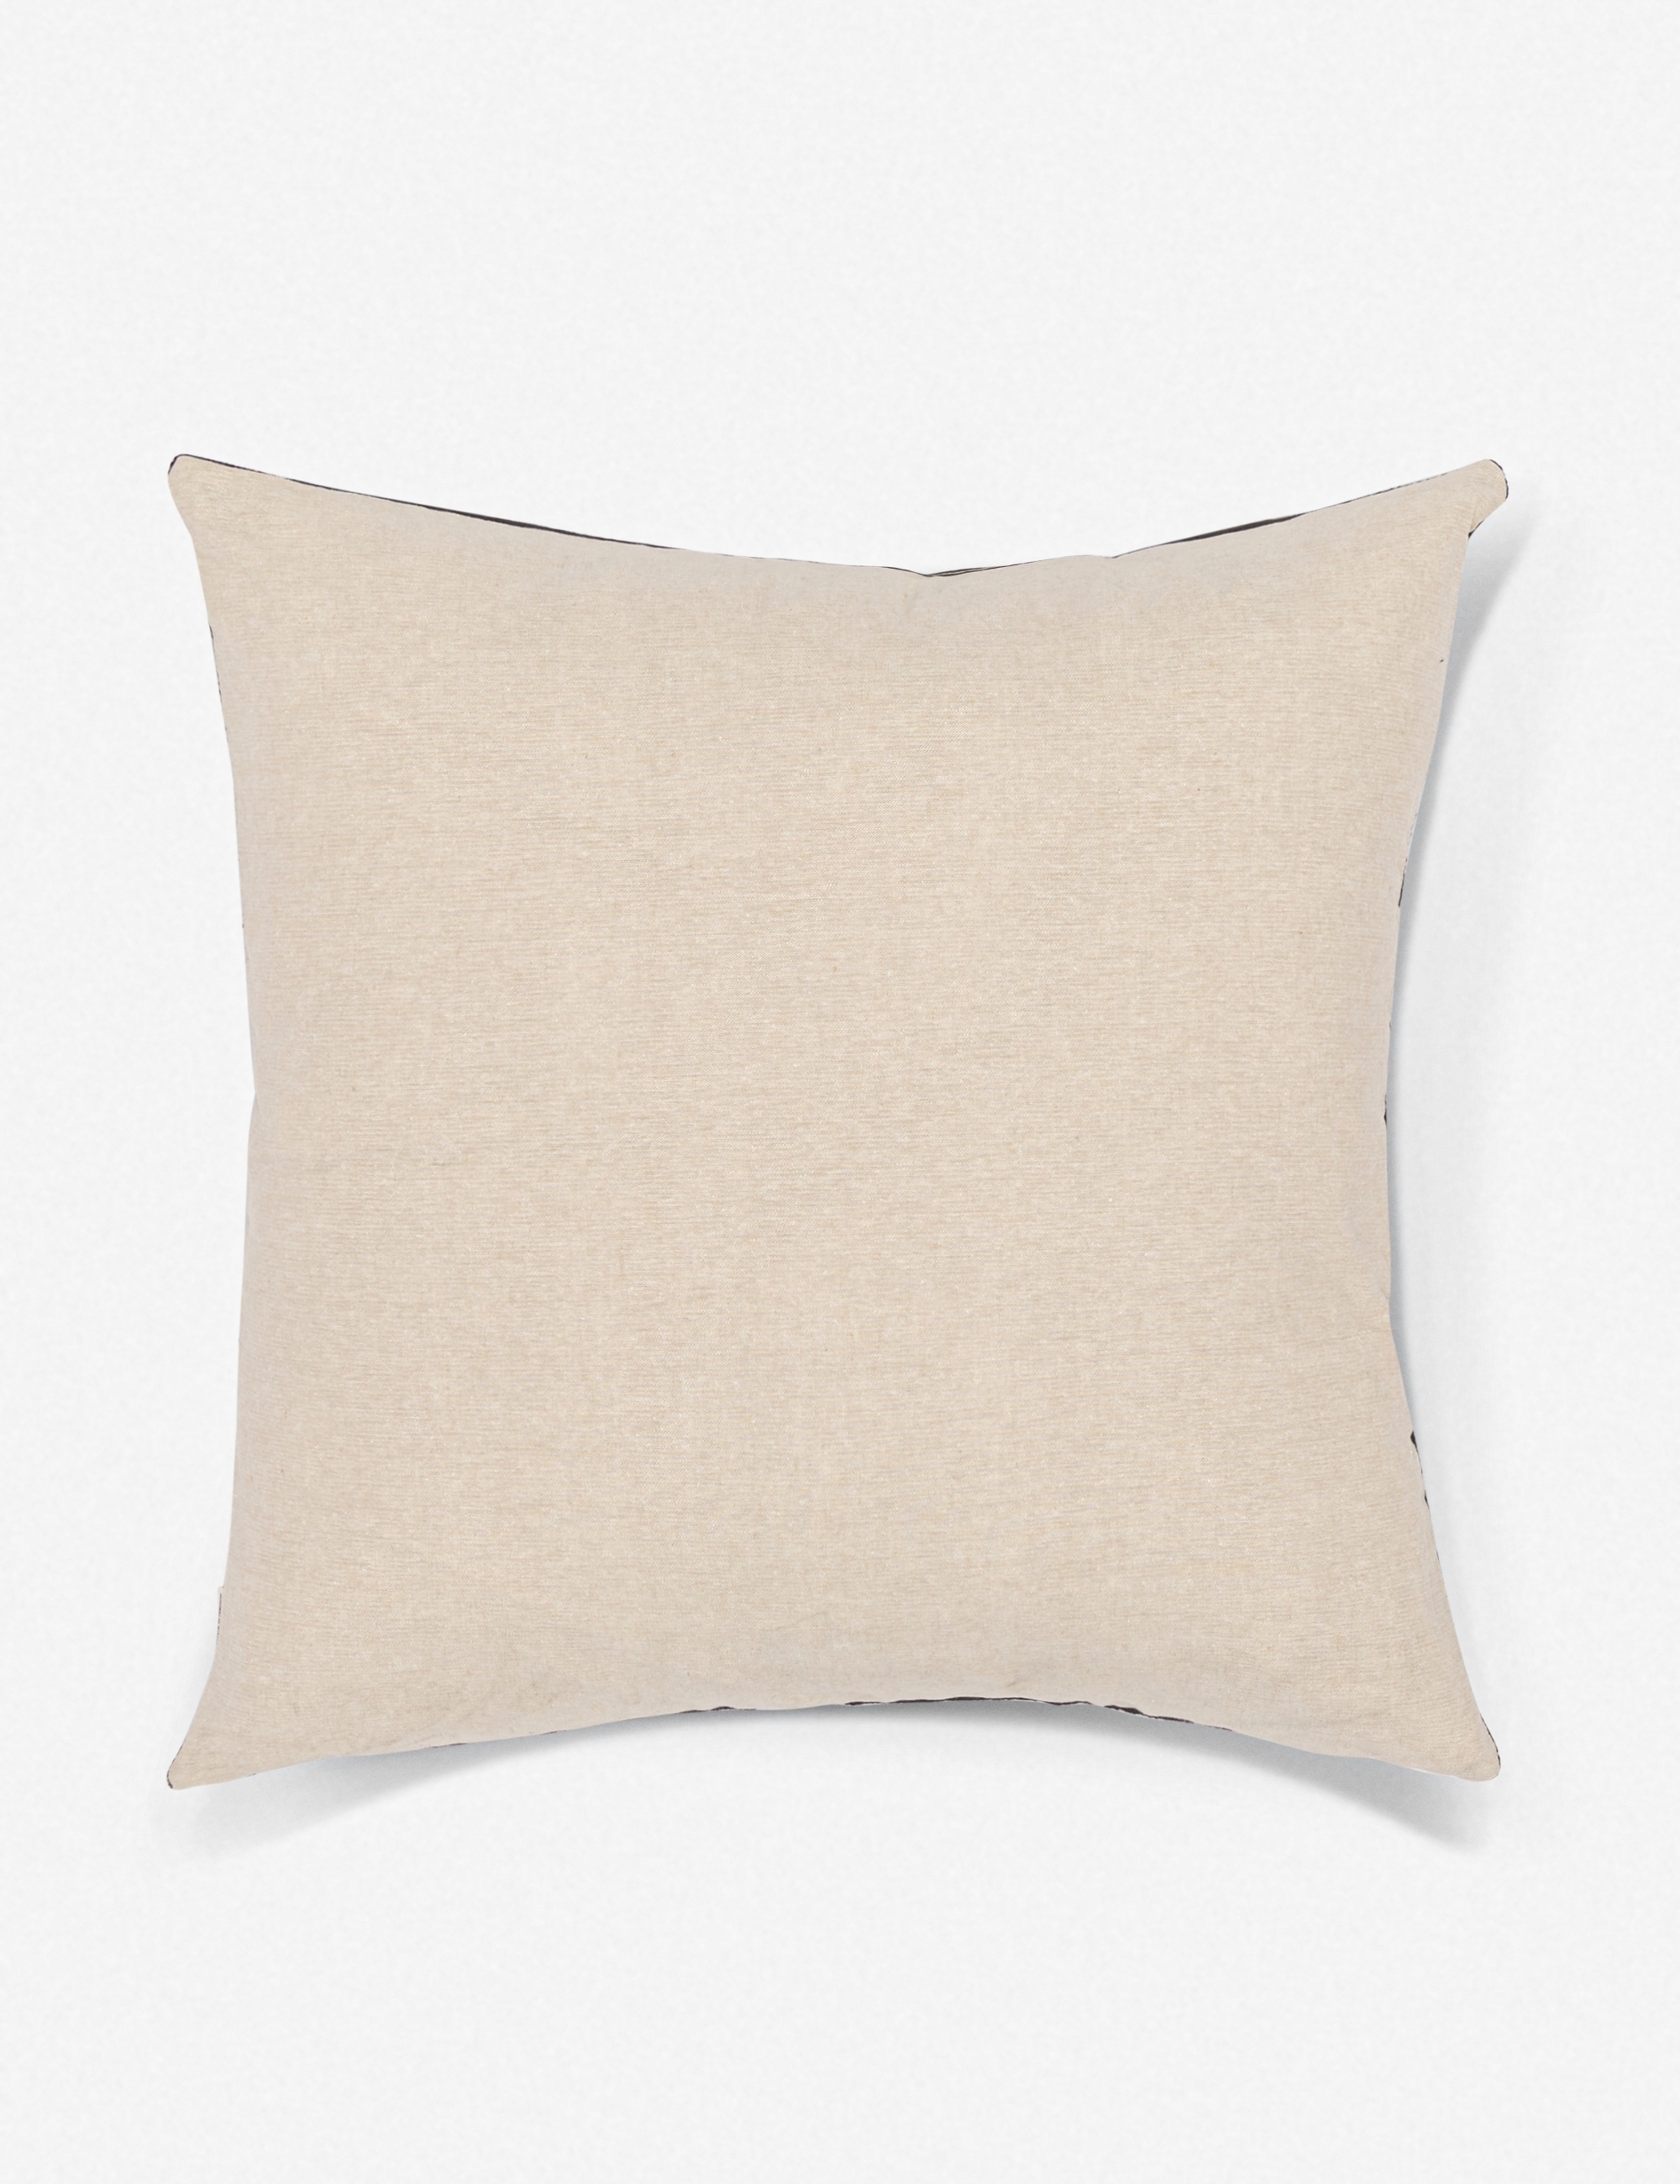 Rainey One Of A Kind Mudcloth Pillow, Ivory - Image 2